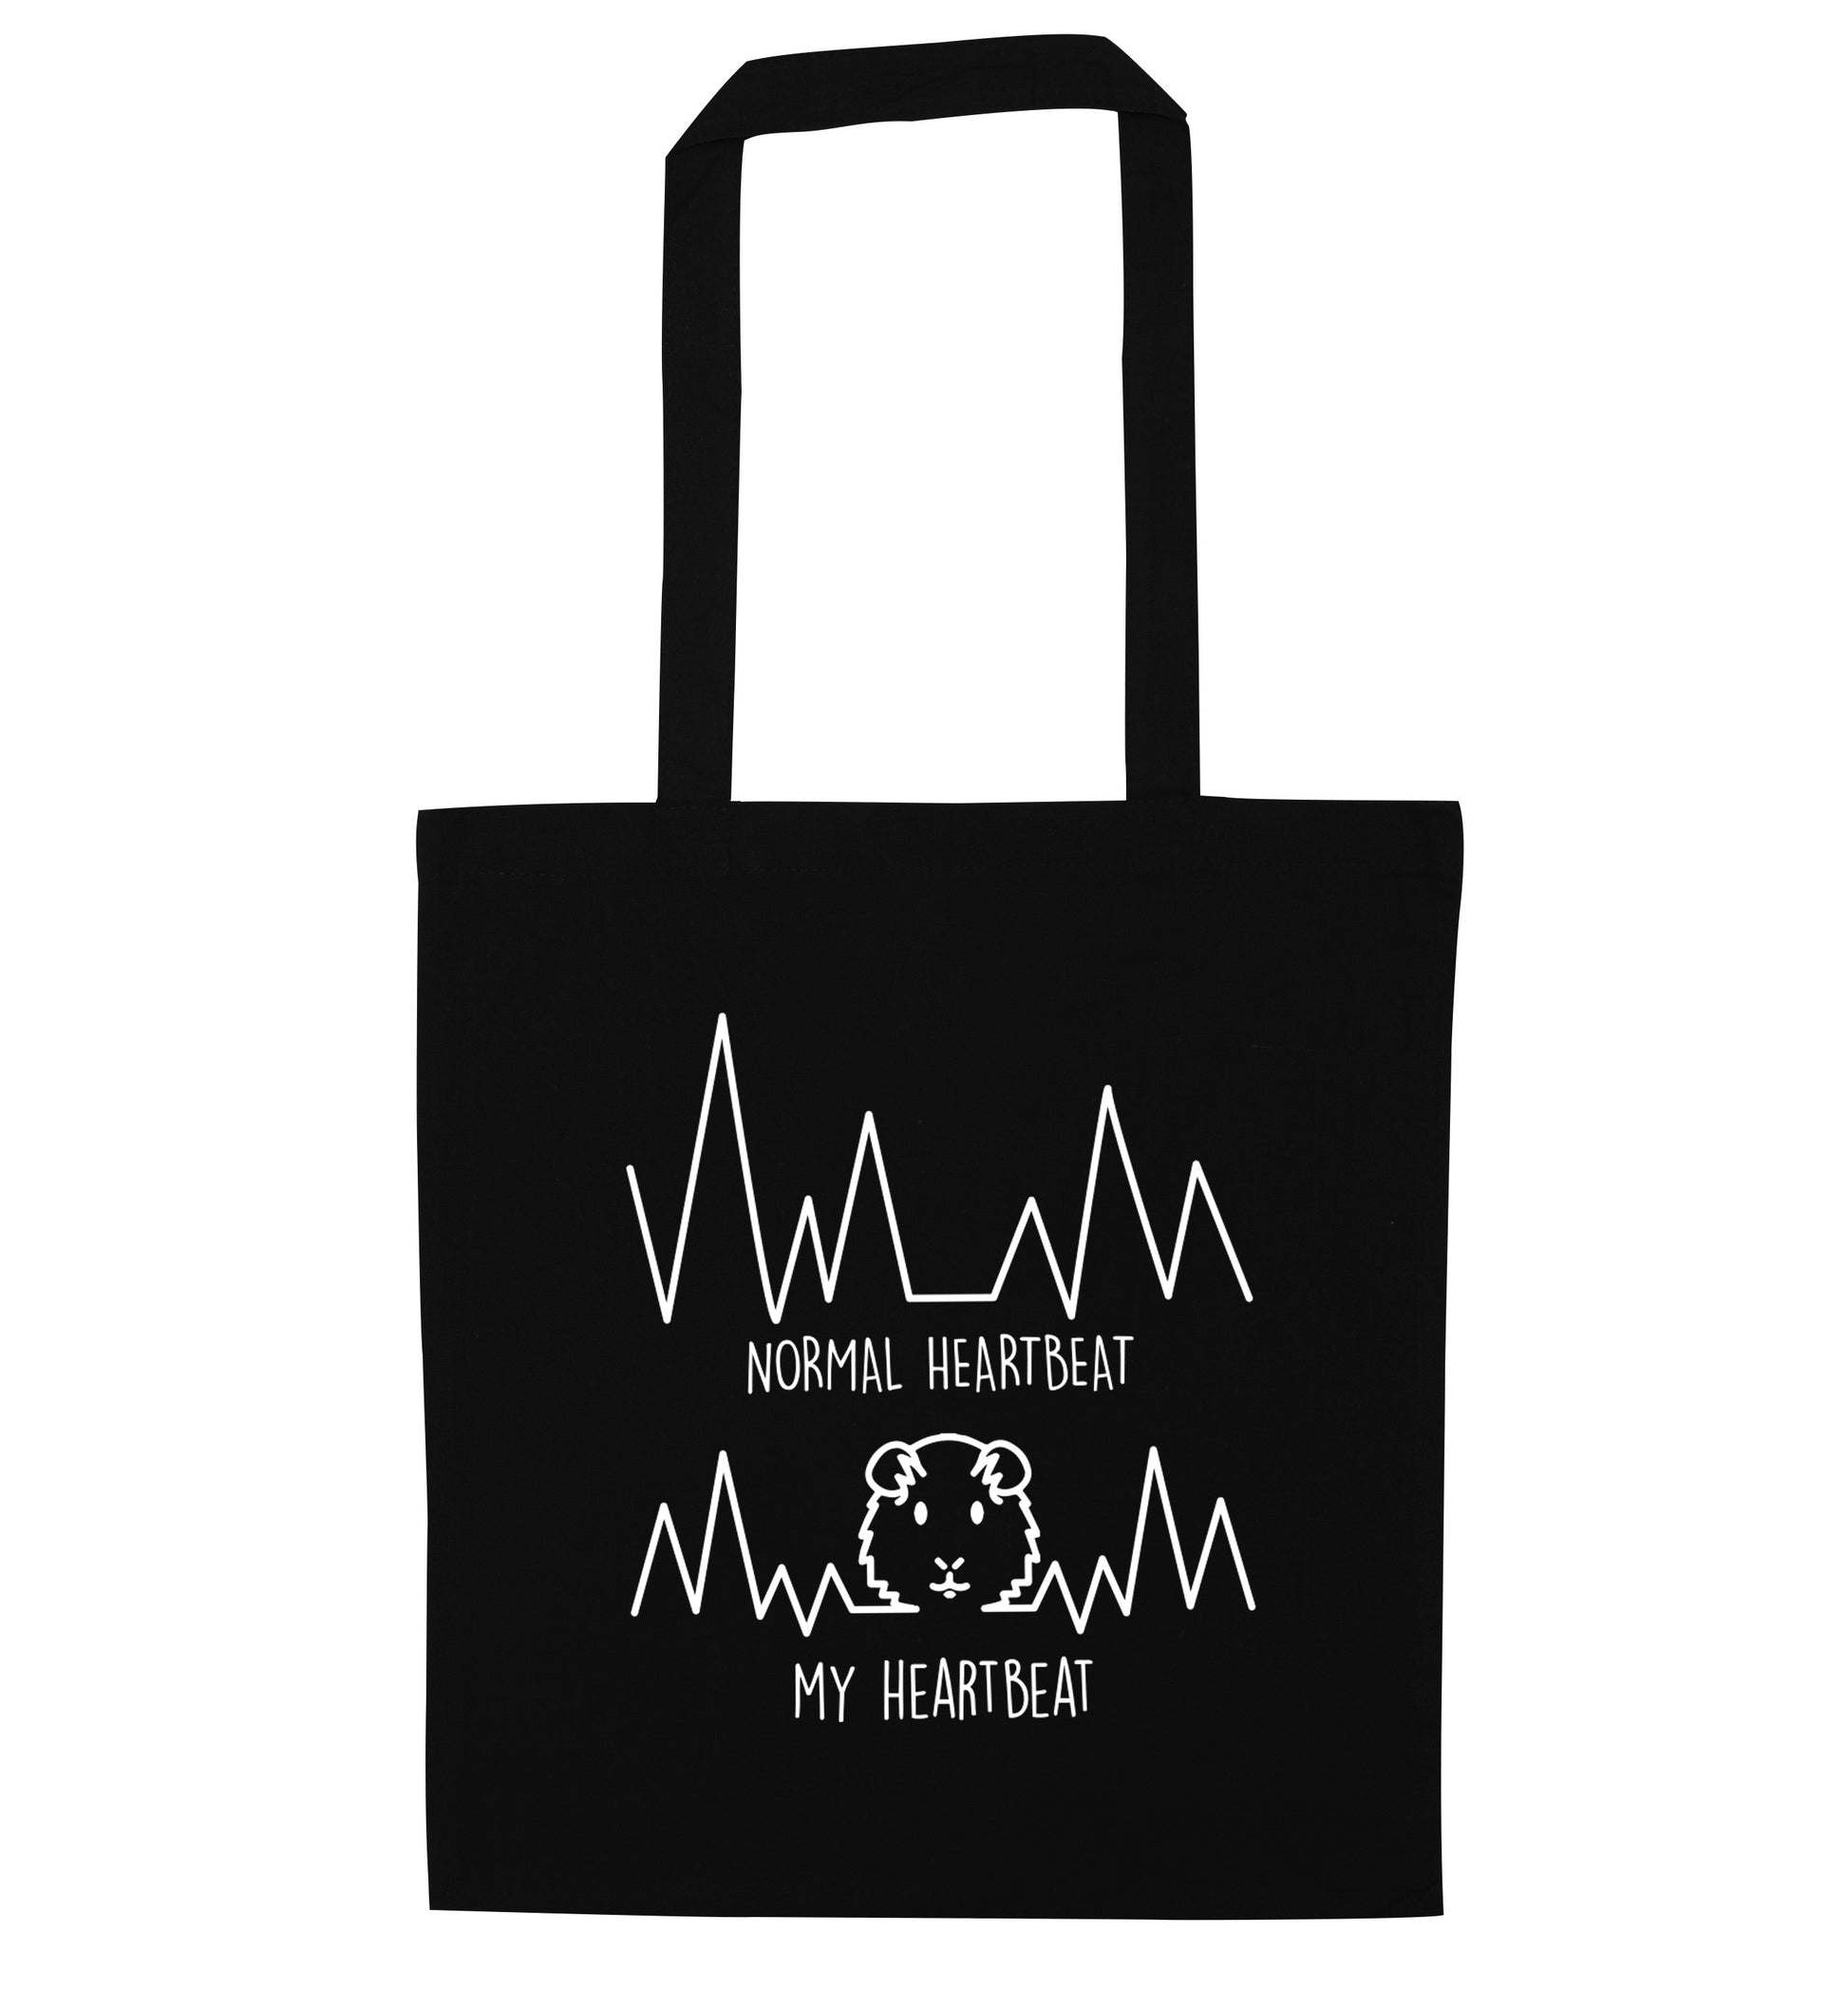 Normal heartbeat vs my heartbeat guinea pig lover black tote bag